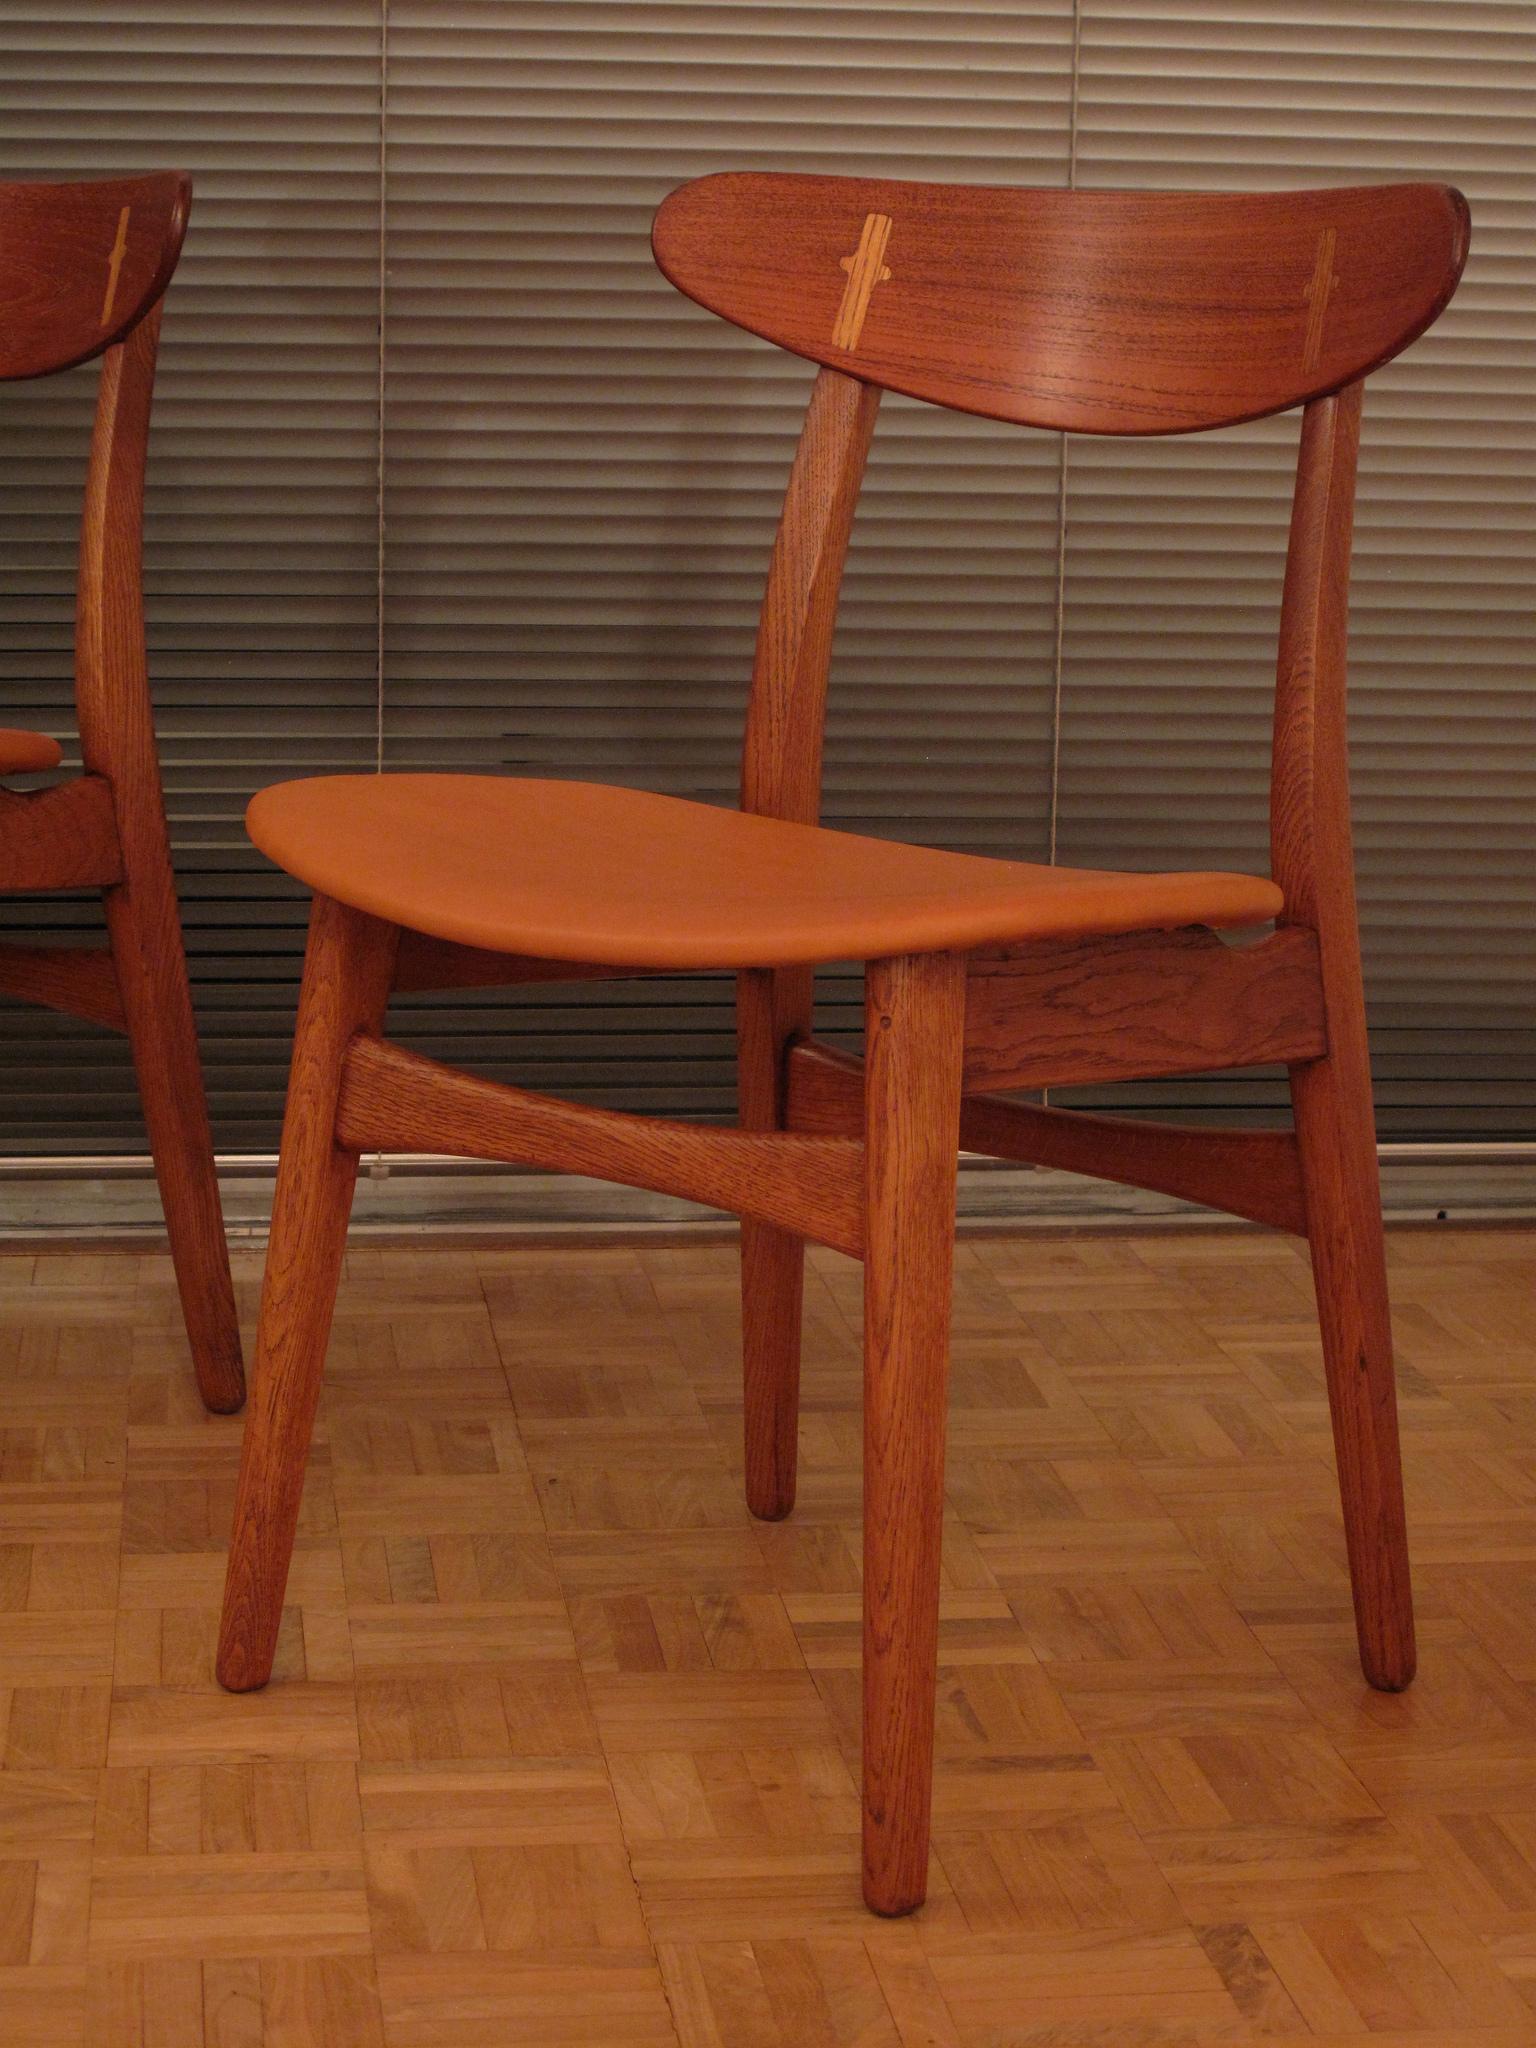 Mid-20th Century Pair of Hans Wegner CH30 Oak, Teak and Leather Chairs for Carl Hansen & Son